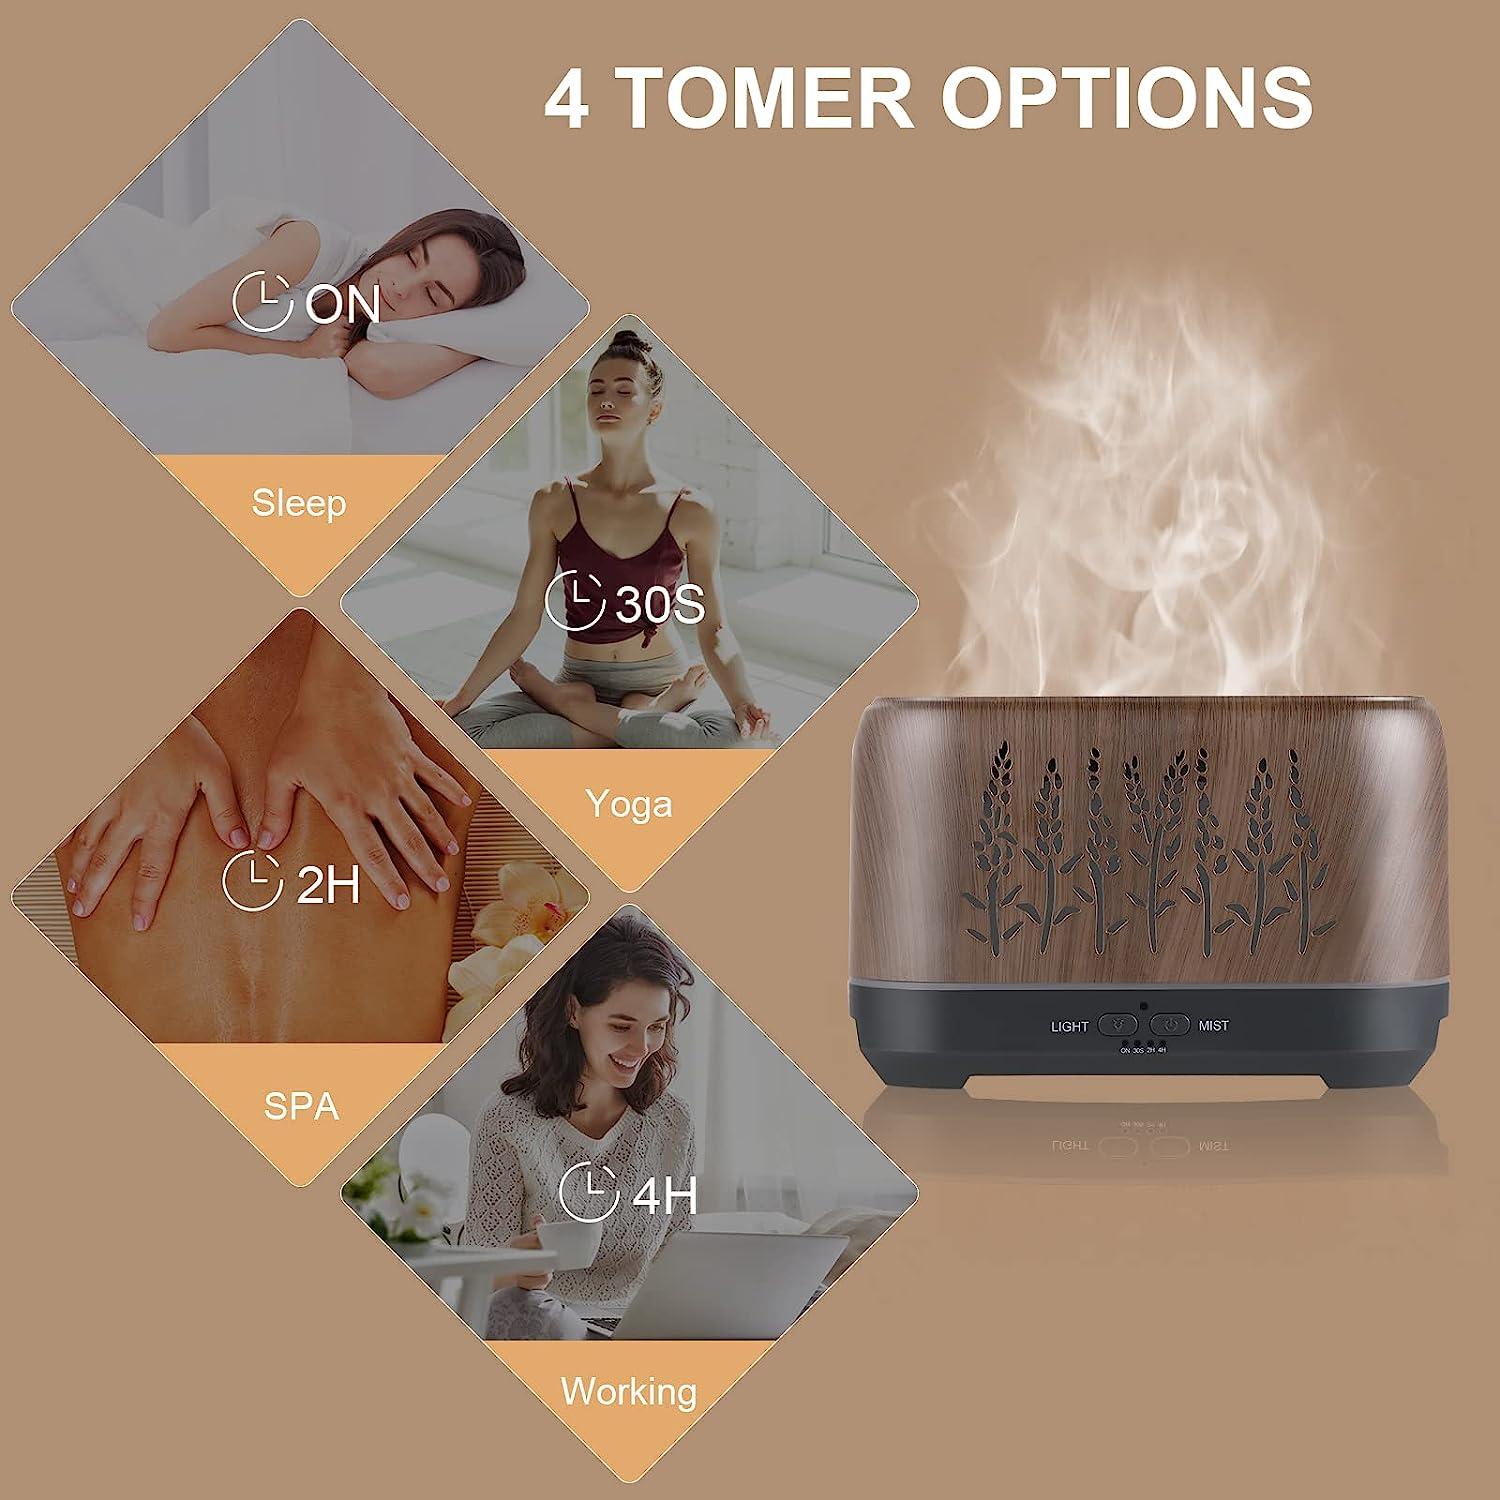 Pure-Mist Waterless Diffuser [Free 10ml Essential Oil] – Aroma Matters